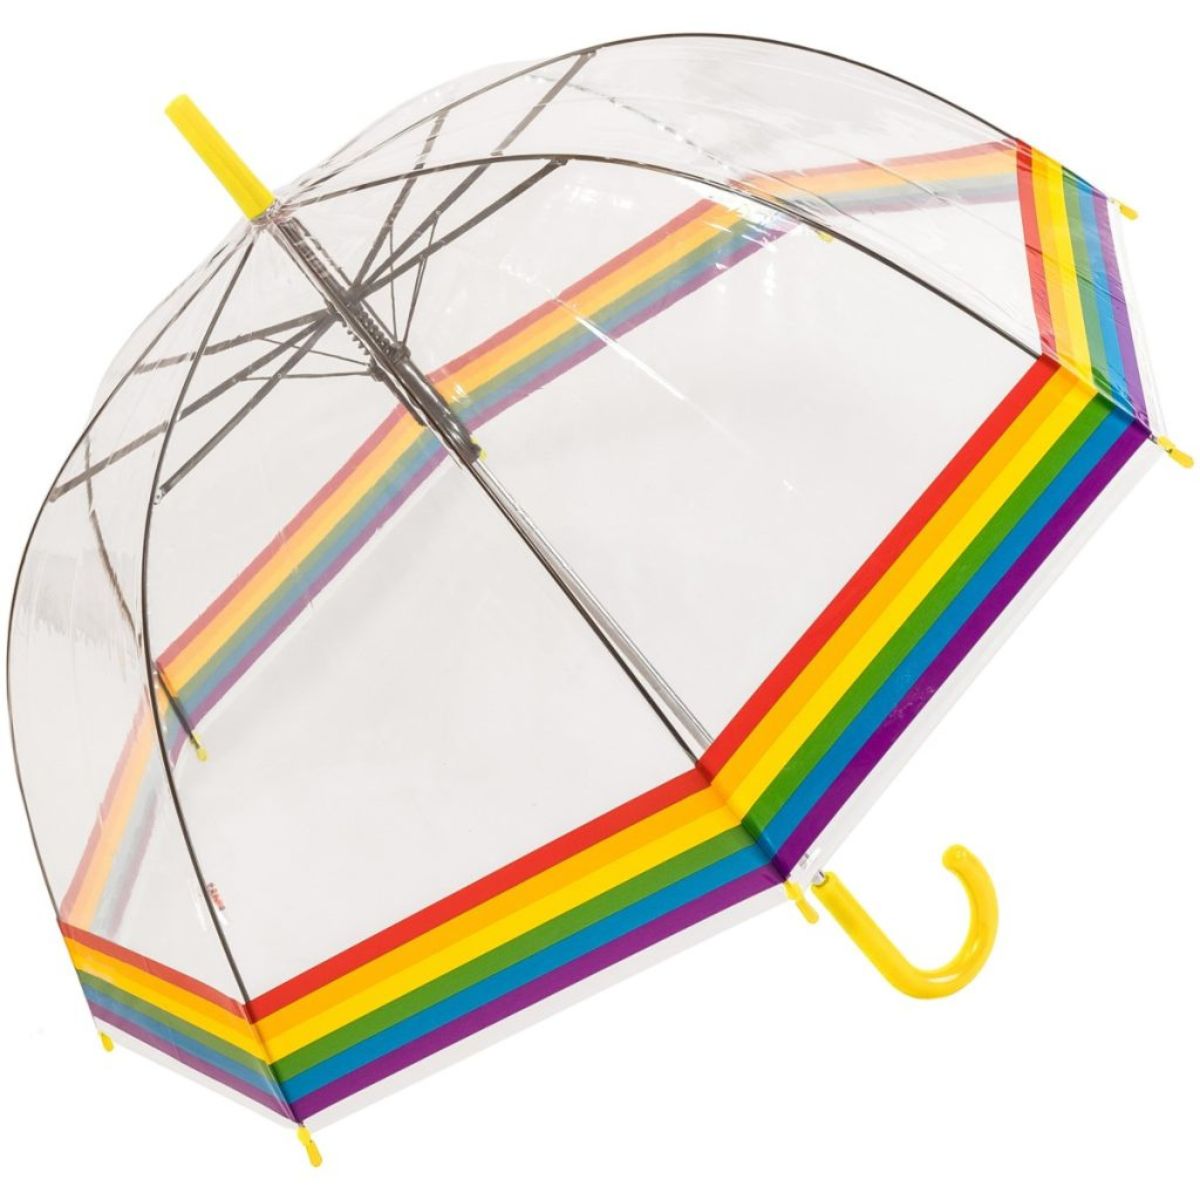 clear adult umbrella opened for front